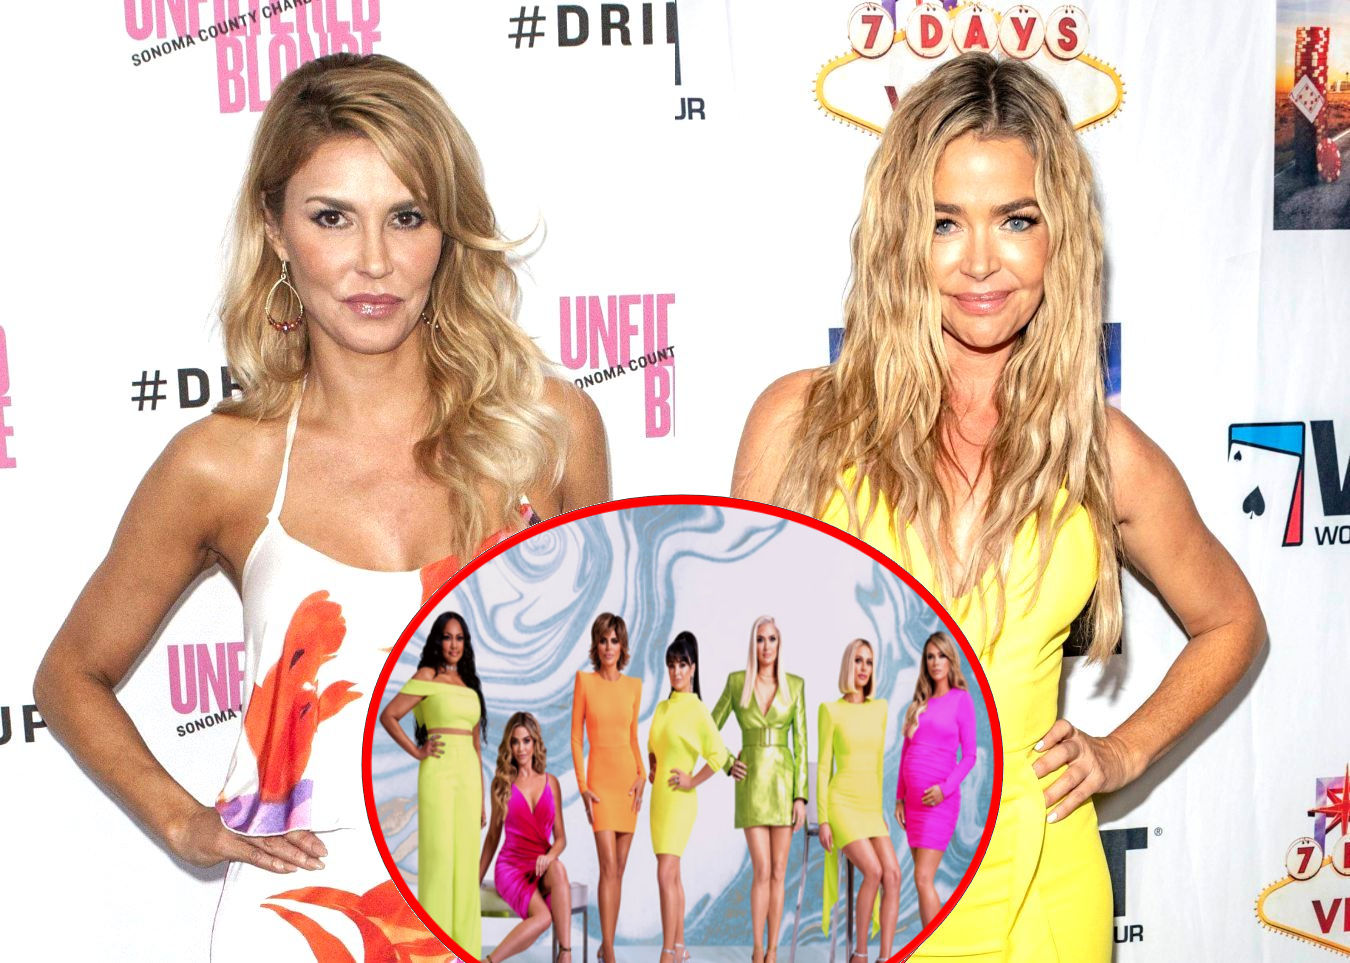 VIDEO: Brandi Glanville Exposes Alleged Romp With Denise Richards in Shocking RHOBH Midseason Trailer as Denise Denies Affair, Garcelle Labels Lisa Rinna the “Bad Guy” and Denise Begs Producers to Cut Footage, Plus Live Viewing Thread